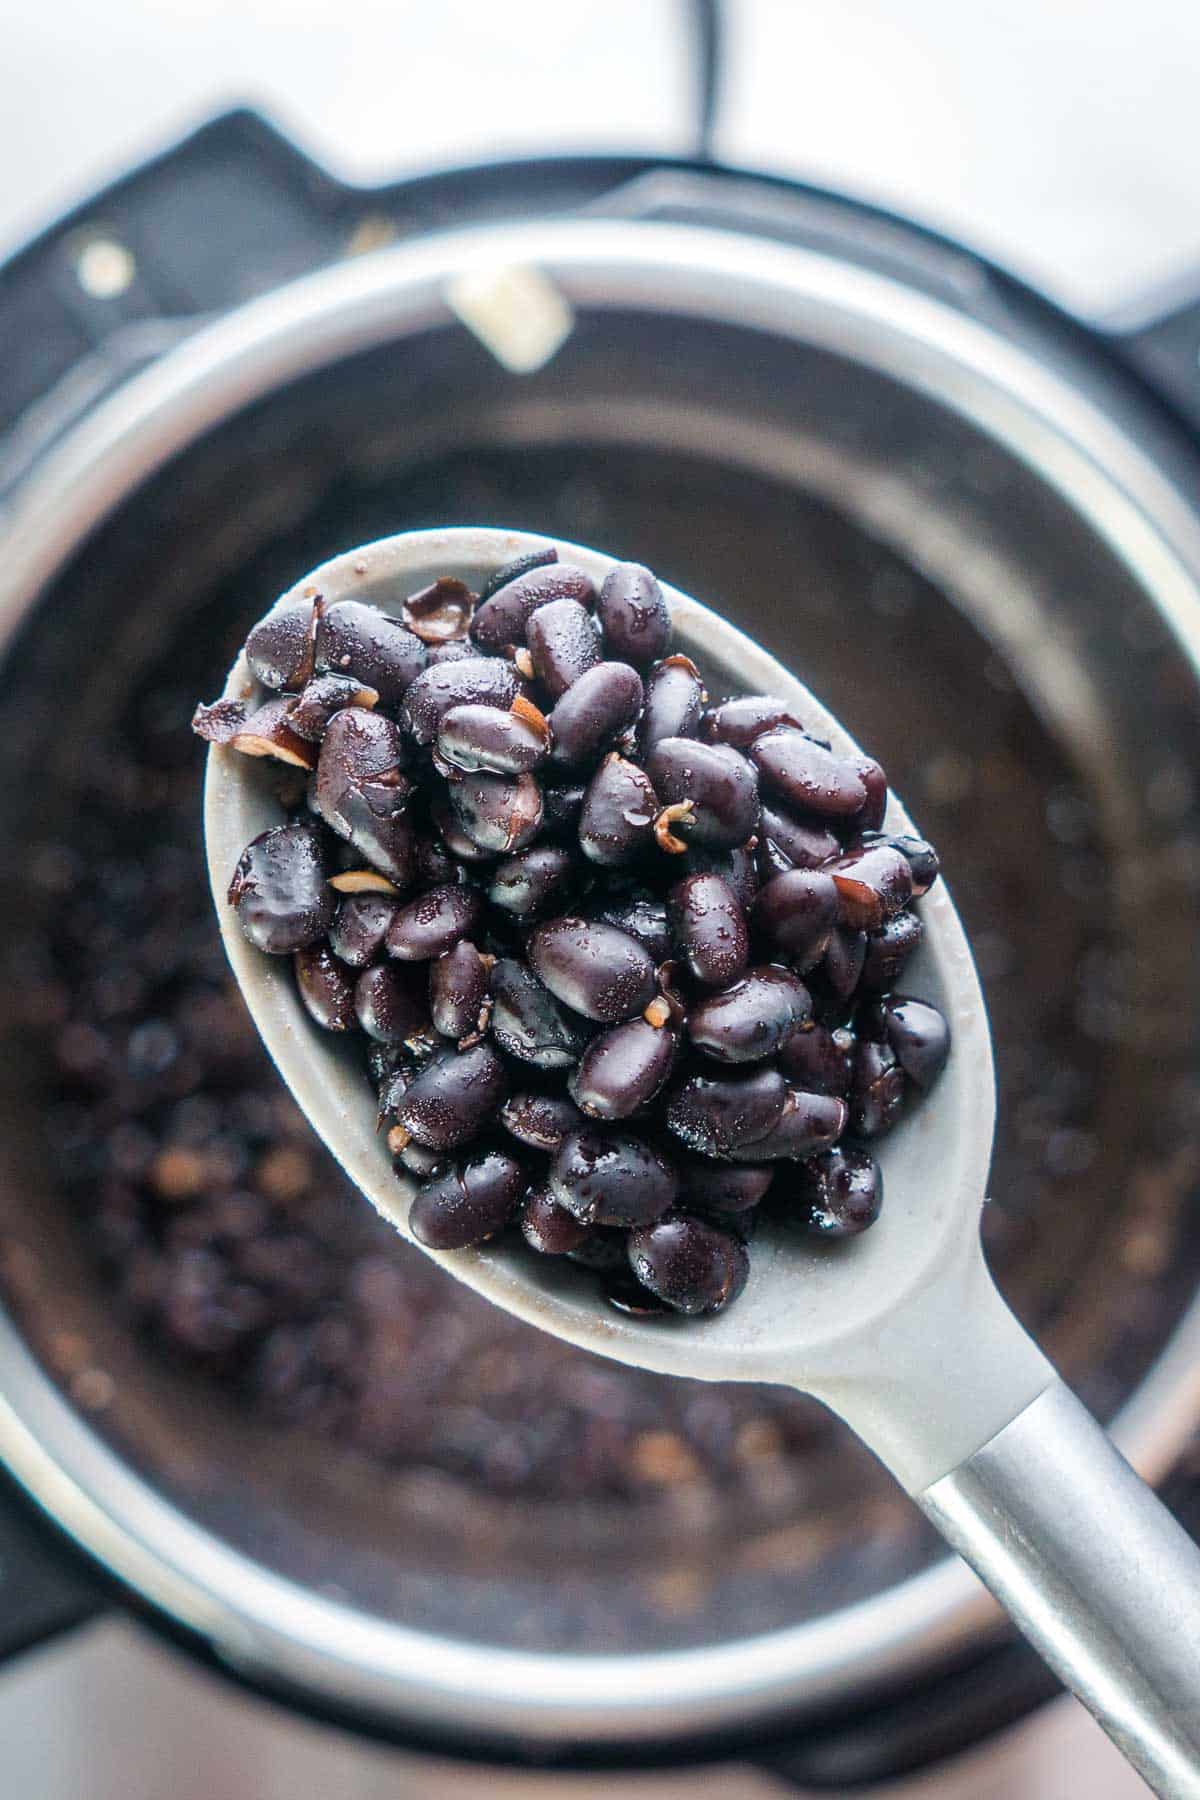 spoonful of cooked black beans has been lifted from the Instant Pot